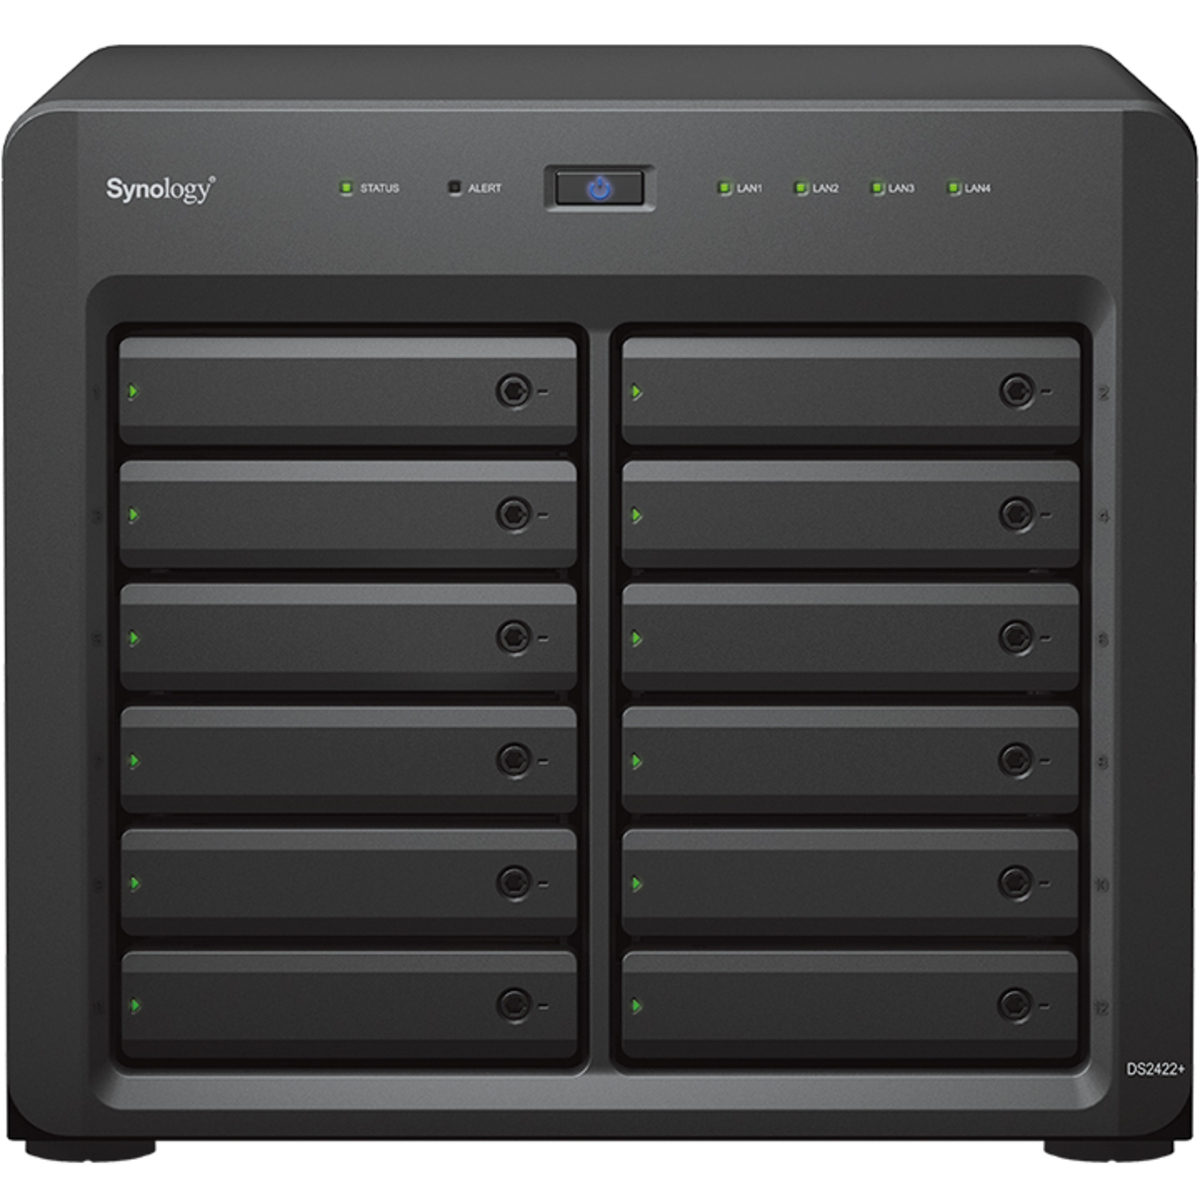 Synology DiskStation DS2422+ 8tb 12-Bay Desktop Multimedia / Power User / Business NAS - Network Attached Storage Device 8x1tb Crucial MX500 CT1000MX500SSD1 2.5 560/510MB/s SATA 6Gb/s SSD CONSUMER Class Drives Installed - Burn-In Tested - FREE RAM UPGRADE DiskStation DS2422+